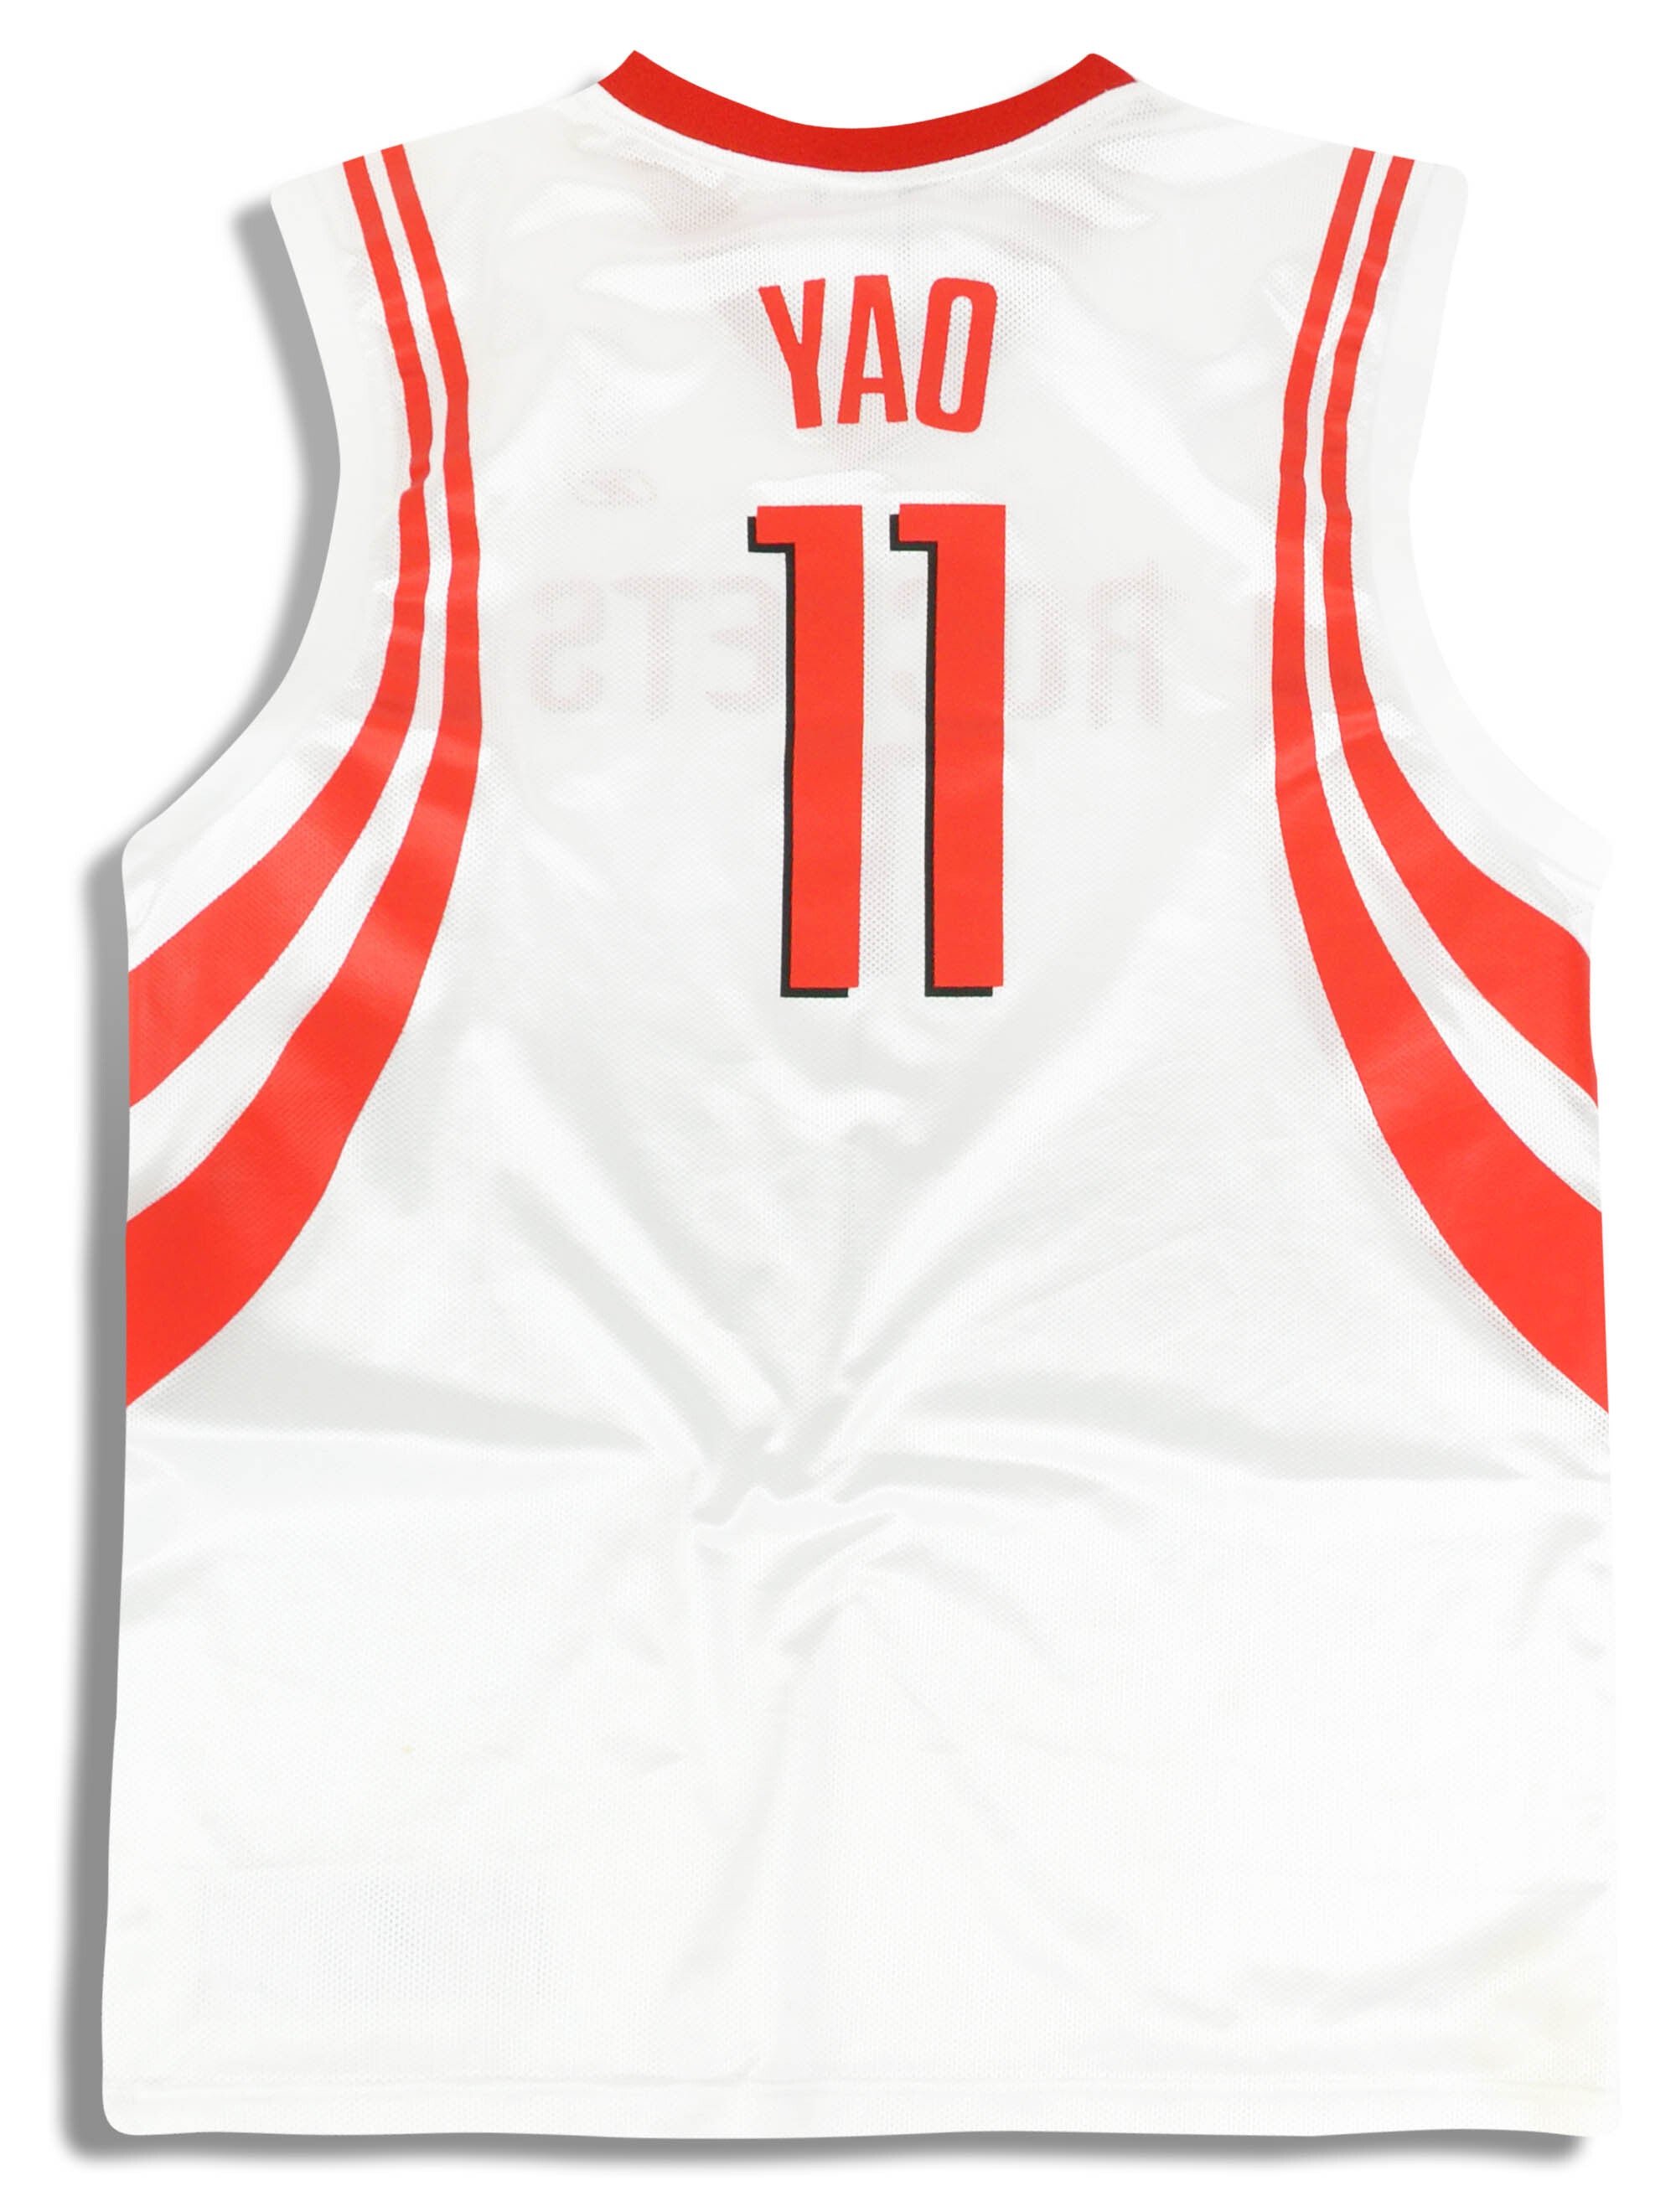 Yao Ming Vintage Reebok Authentic Basketball Jersey -  Sweden